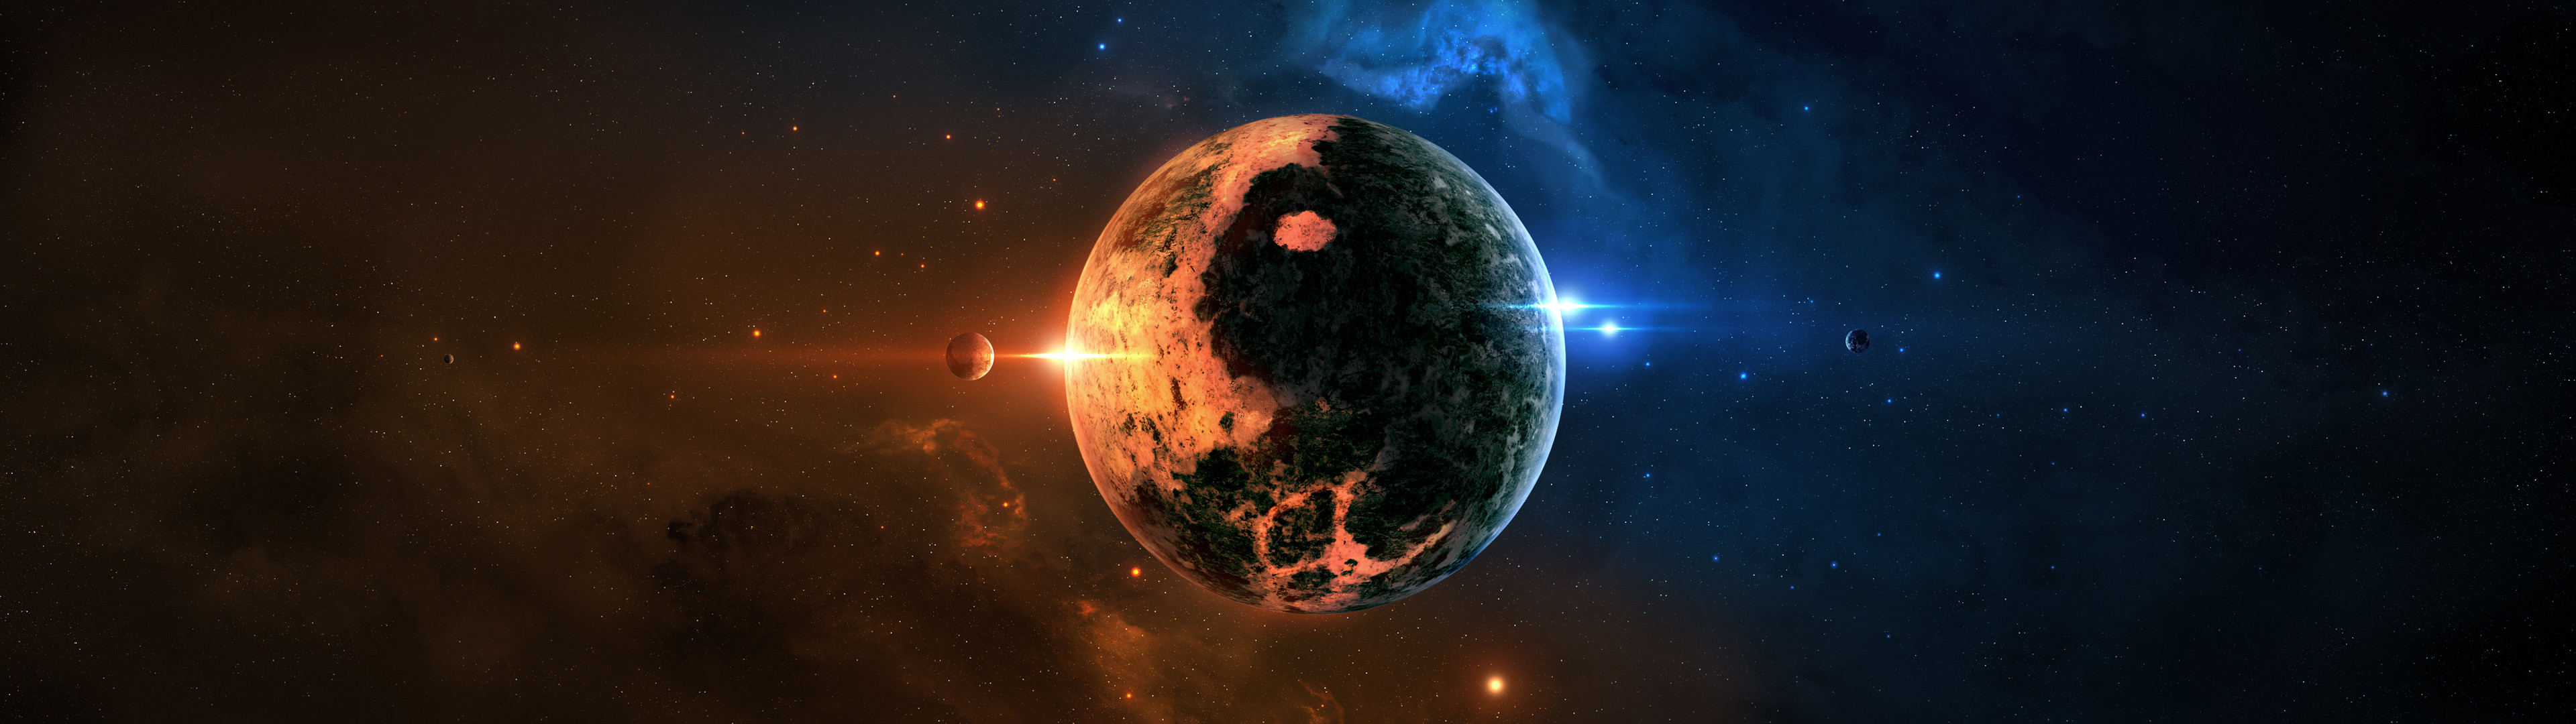 3840x1080 ... planet in outer e dual screen  wallpapers ...